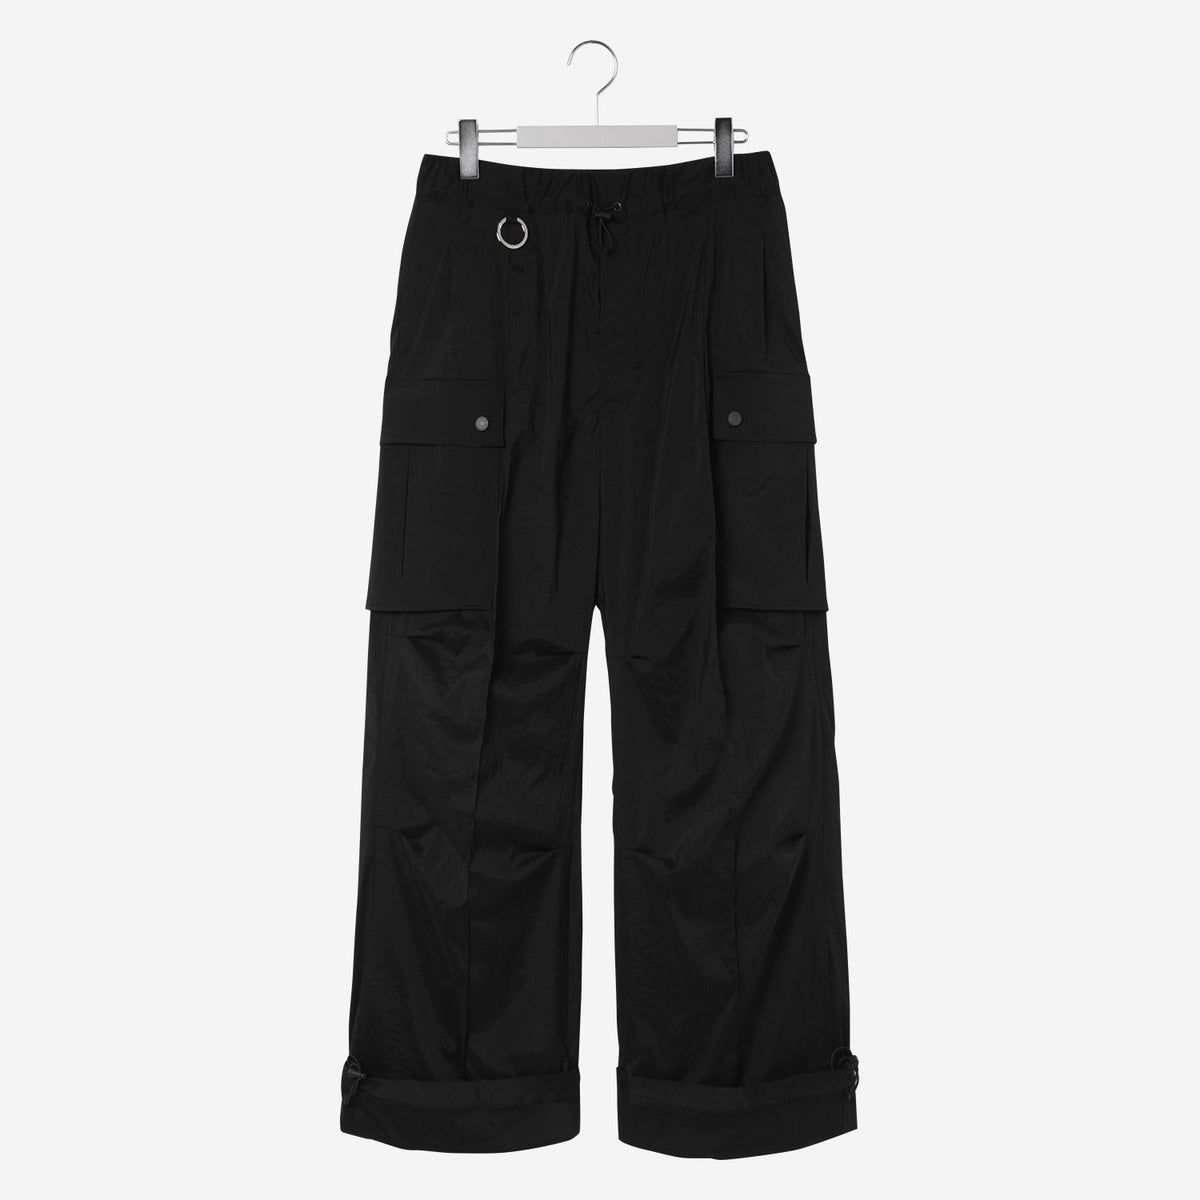 NERDRUM / Cargo Pants / black – th products